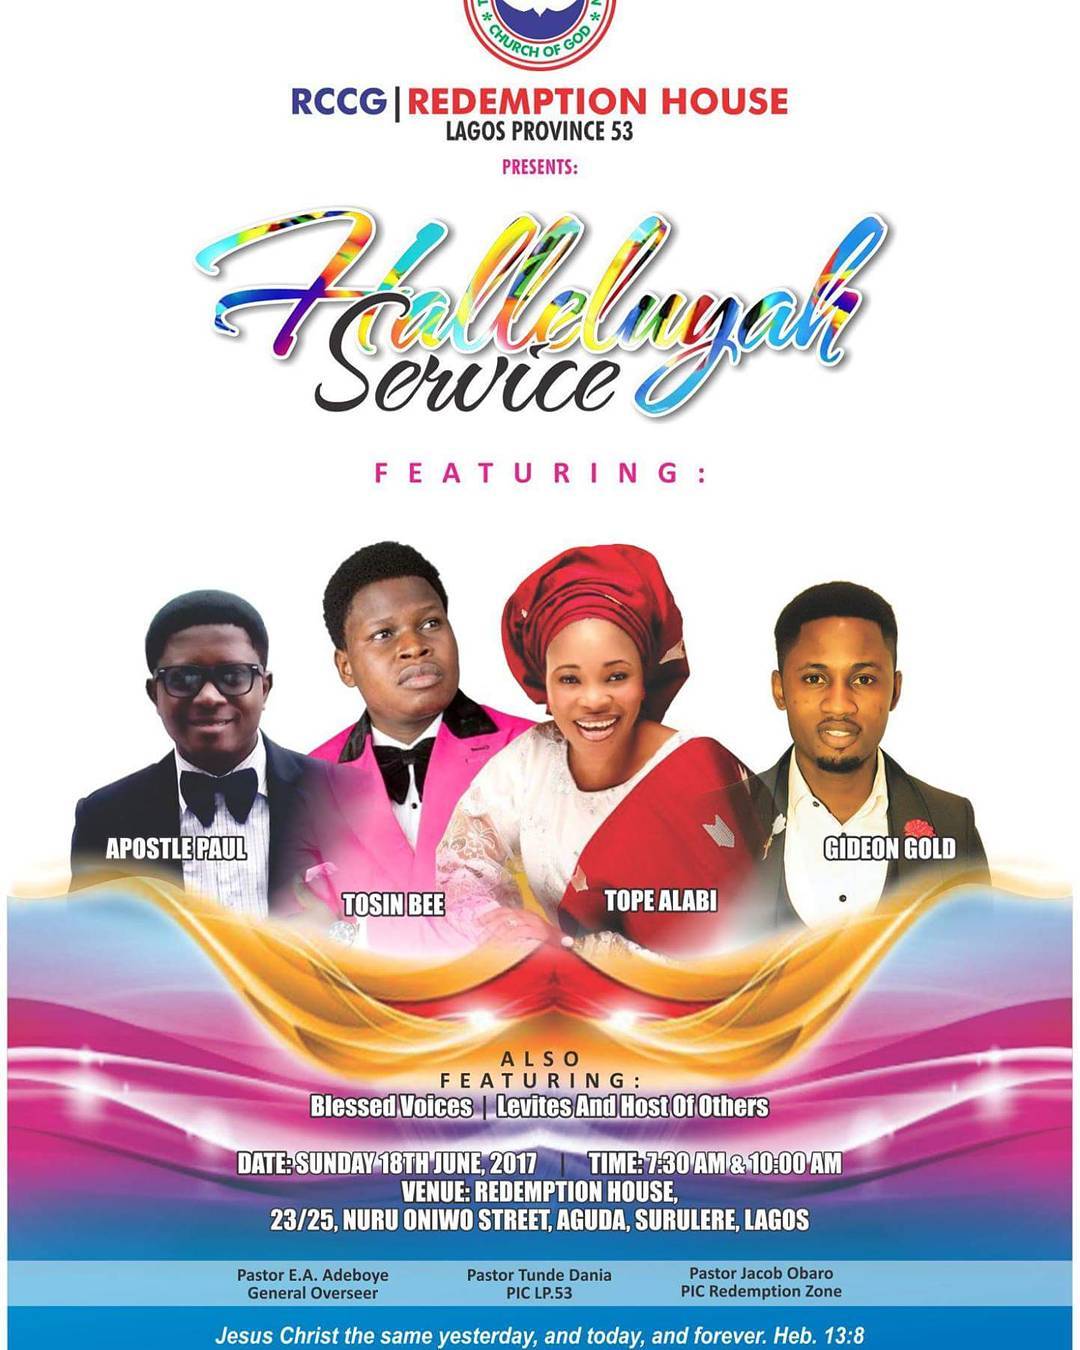 RCCG REDEMPTION HOUSE